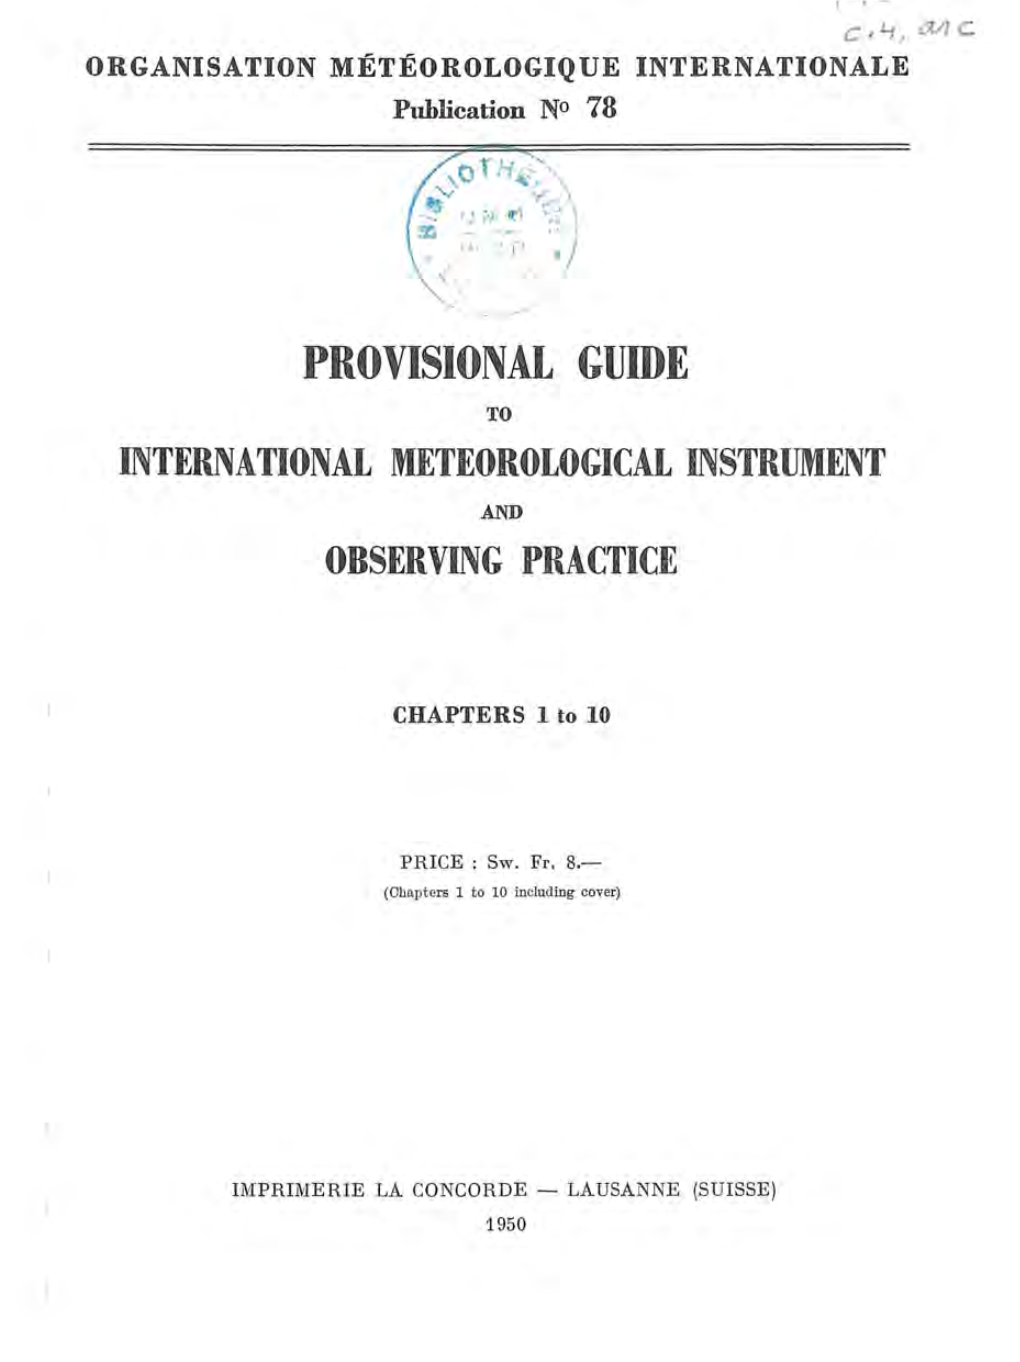 IMO Publication, 78. Provisional Guide to Meteorological Instrument And